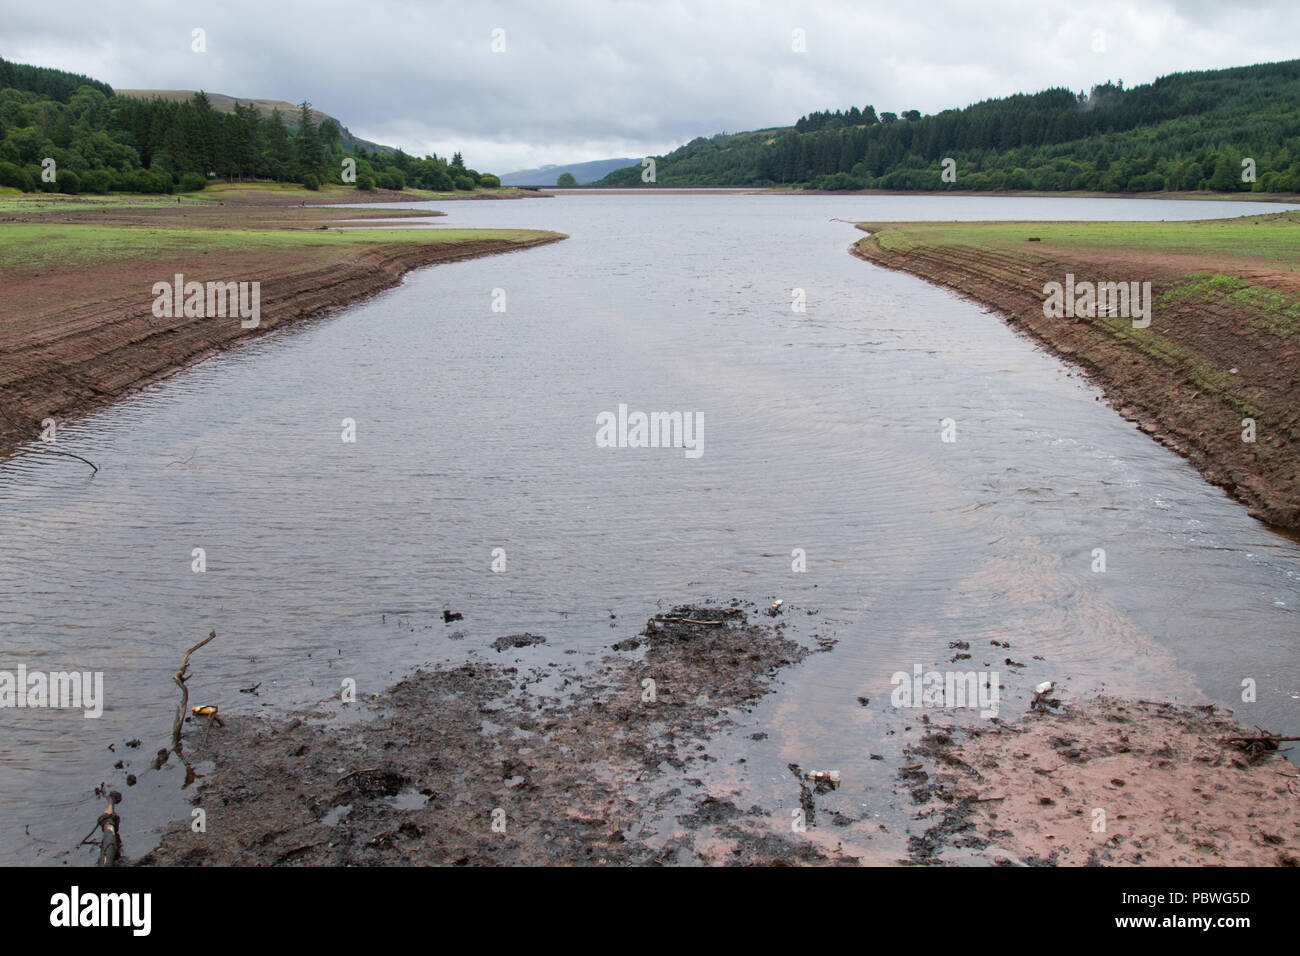 Llwyn Onn reservoir, Merthyr Tydfil, South Wales, UK.  30 July 2018.  UK weather: After just 3 days of heavy rain, levels in this reservoir are significantly higher than when it was pictured a week ago.   Credit: Andrew Bartlett/Alamy Live News Stock Photo